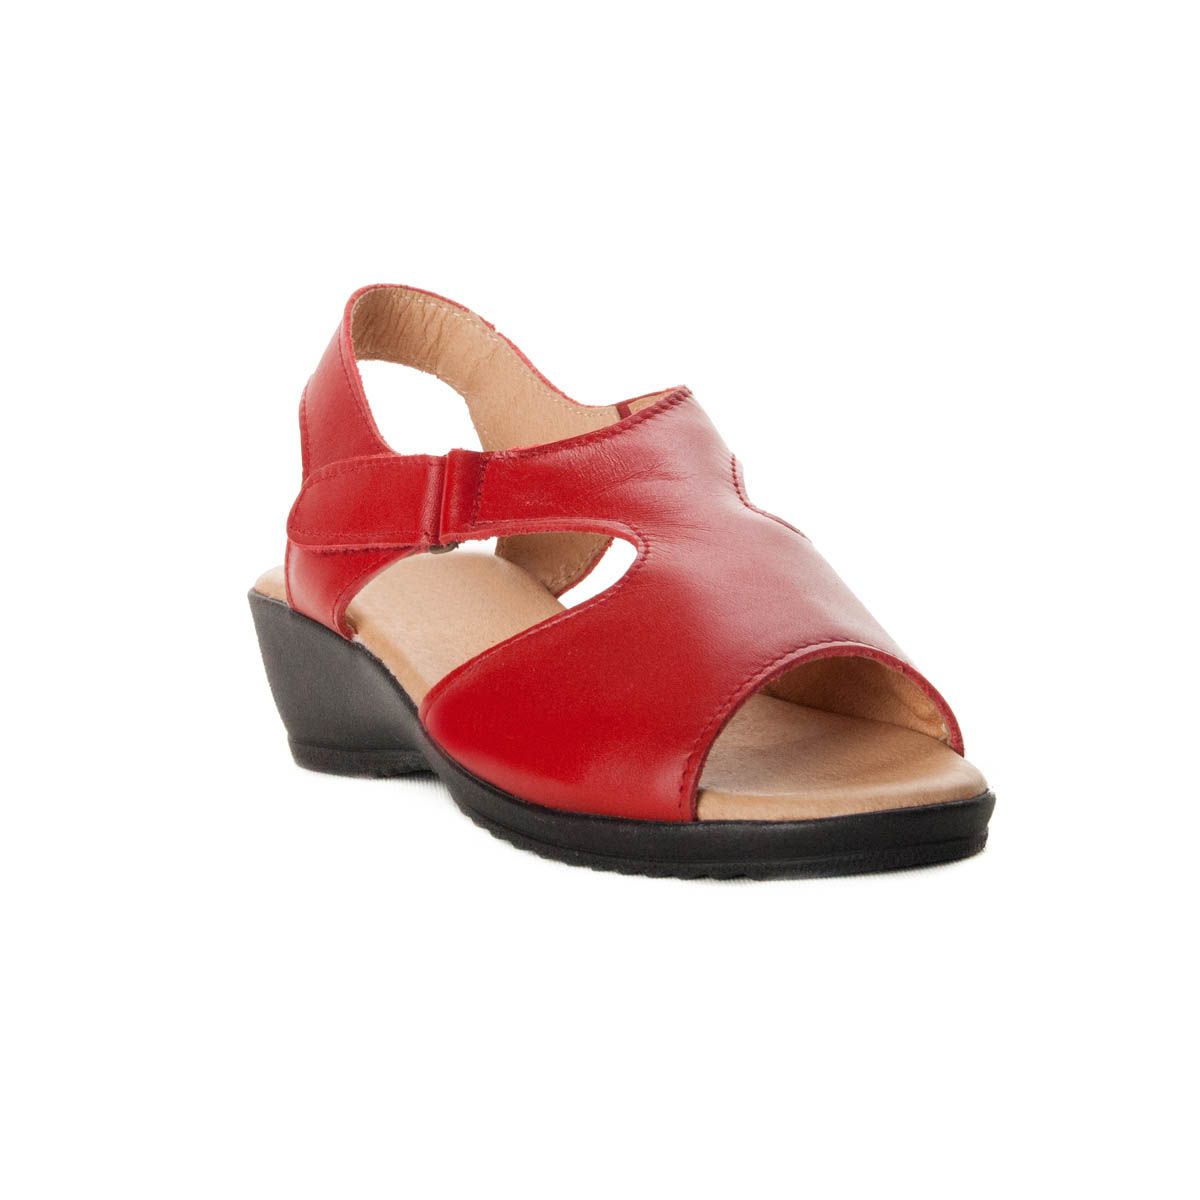 Woman skin sandal, with maximum comfort on the floor, by its gel, soft and padded template. Anatomical Very summer for his style. Made in Spain,